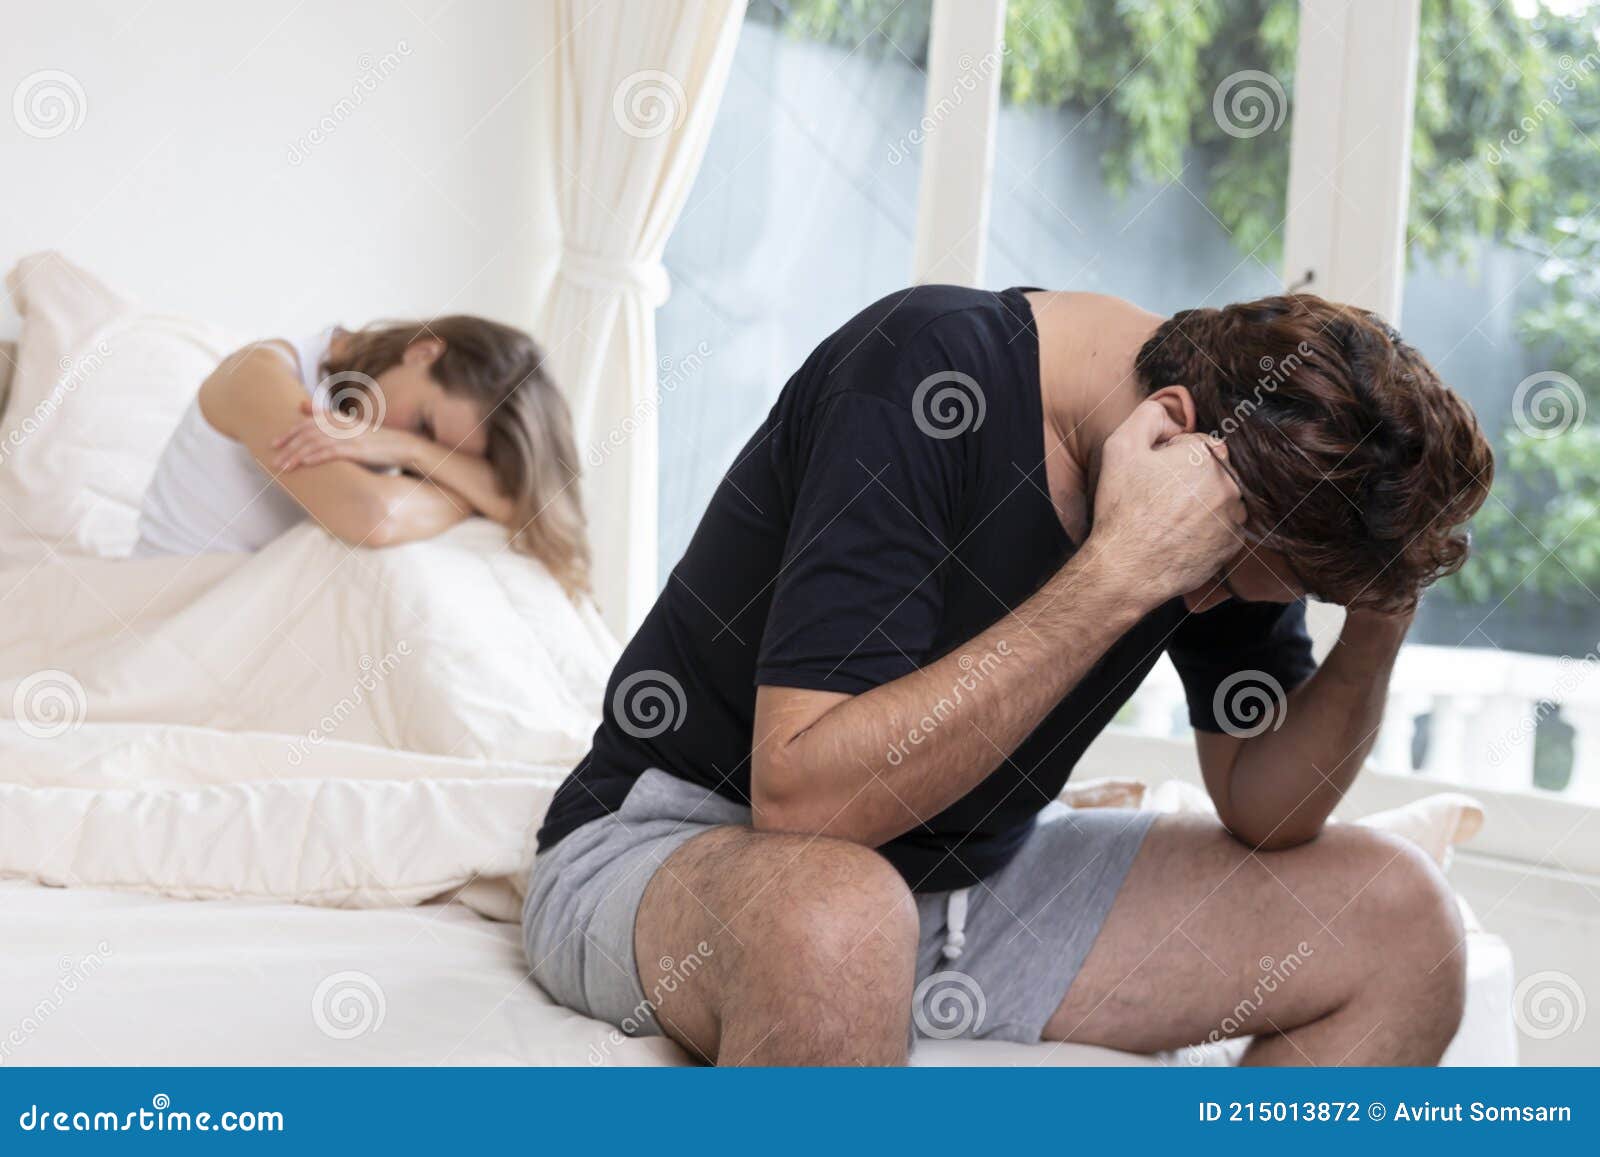 Depressed Man Sitting on the Edge of the Bed in Bedroom image